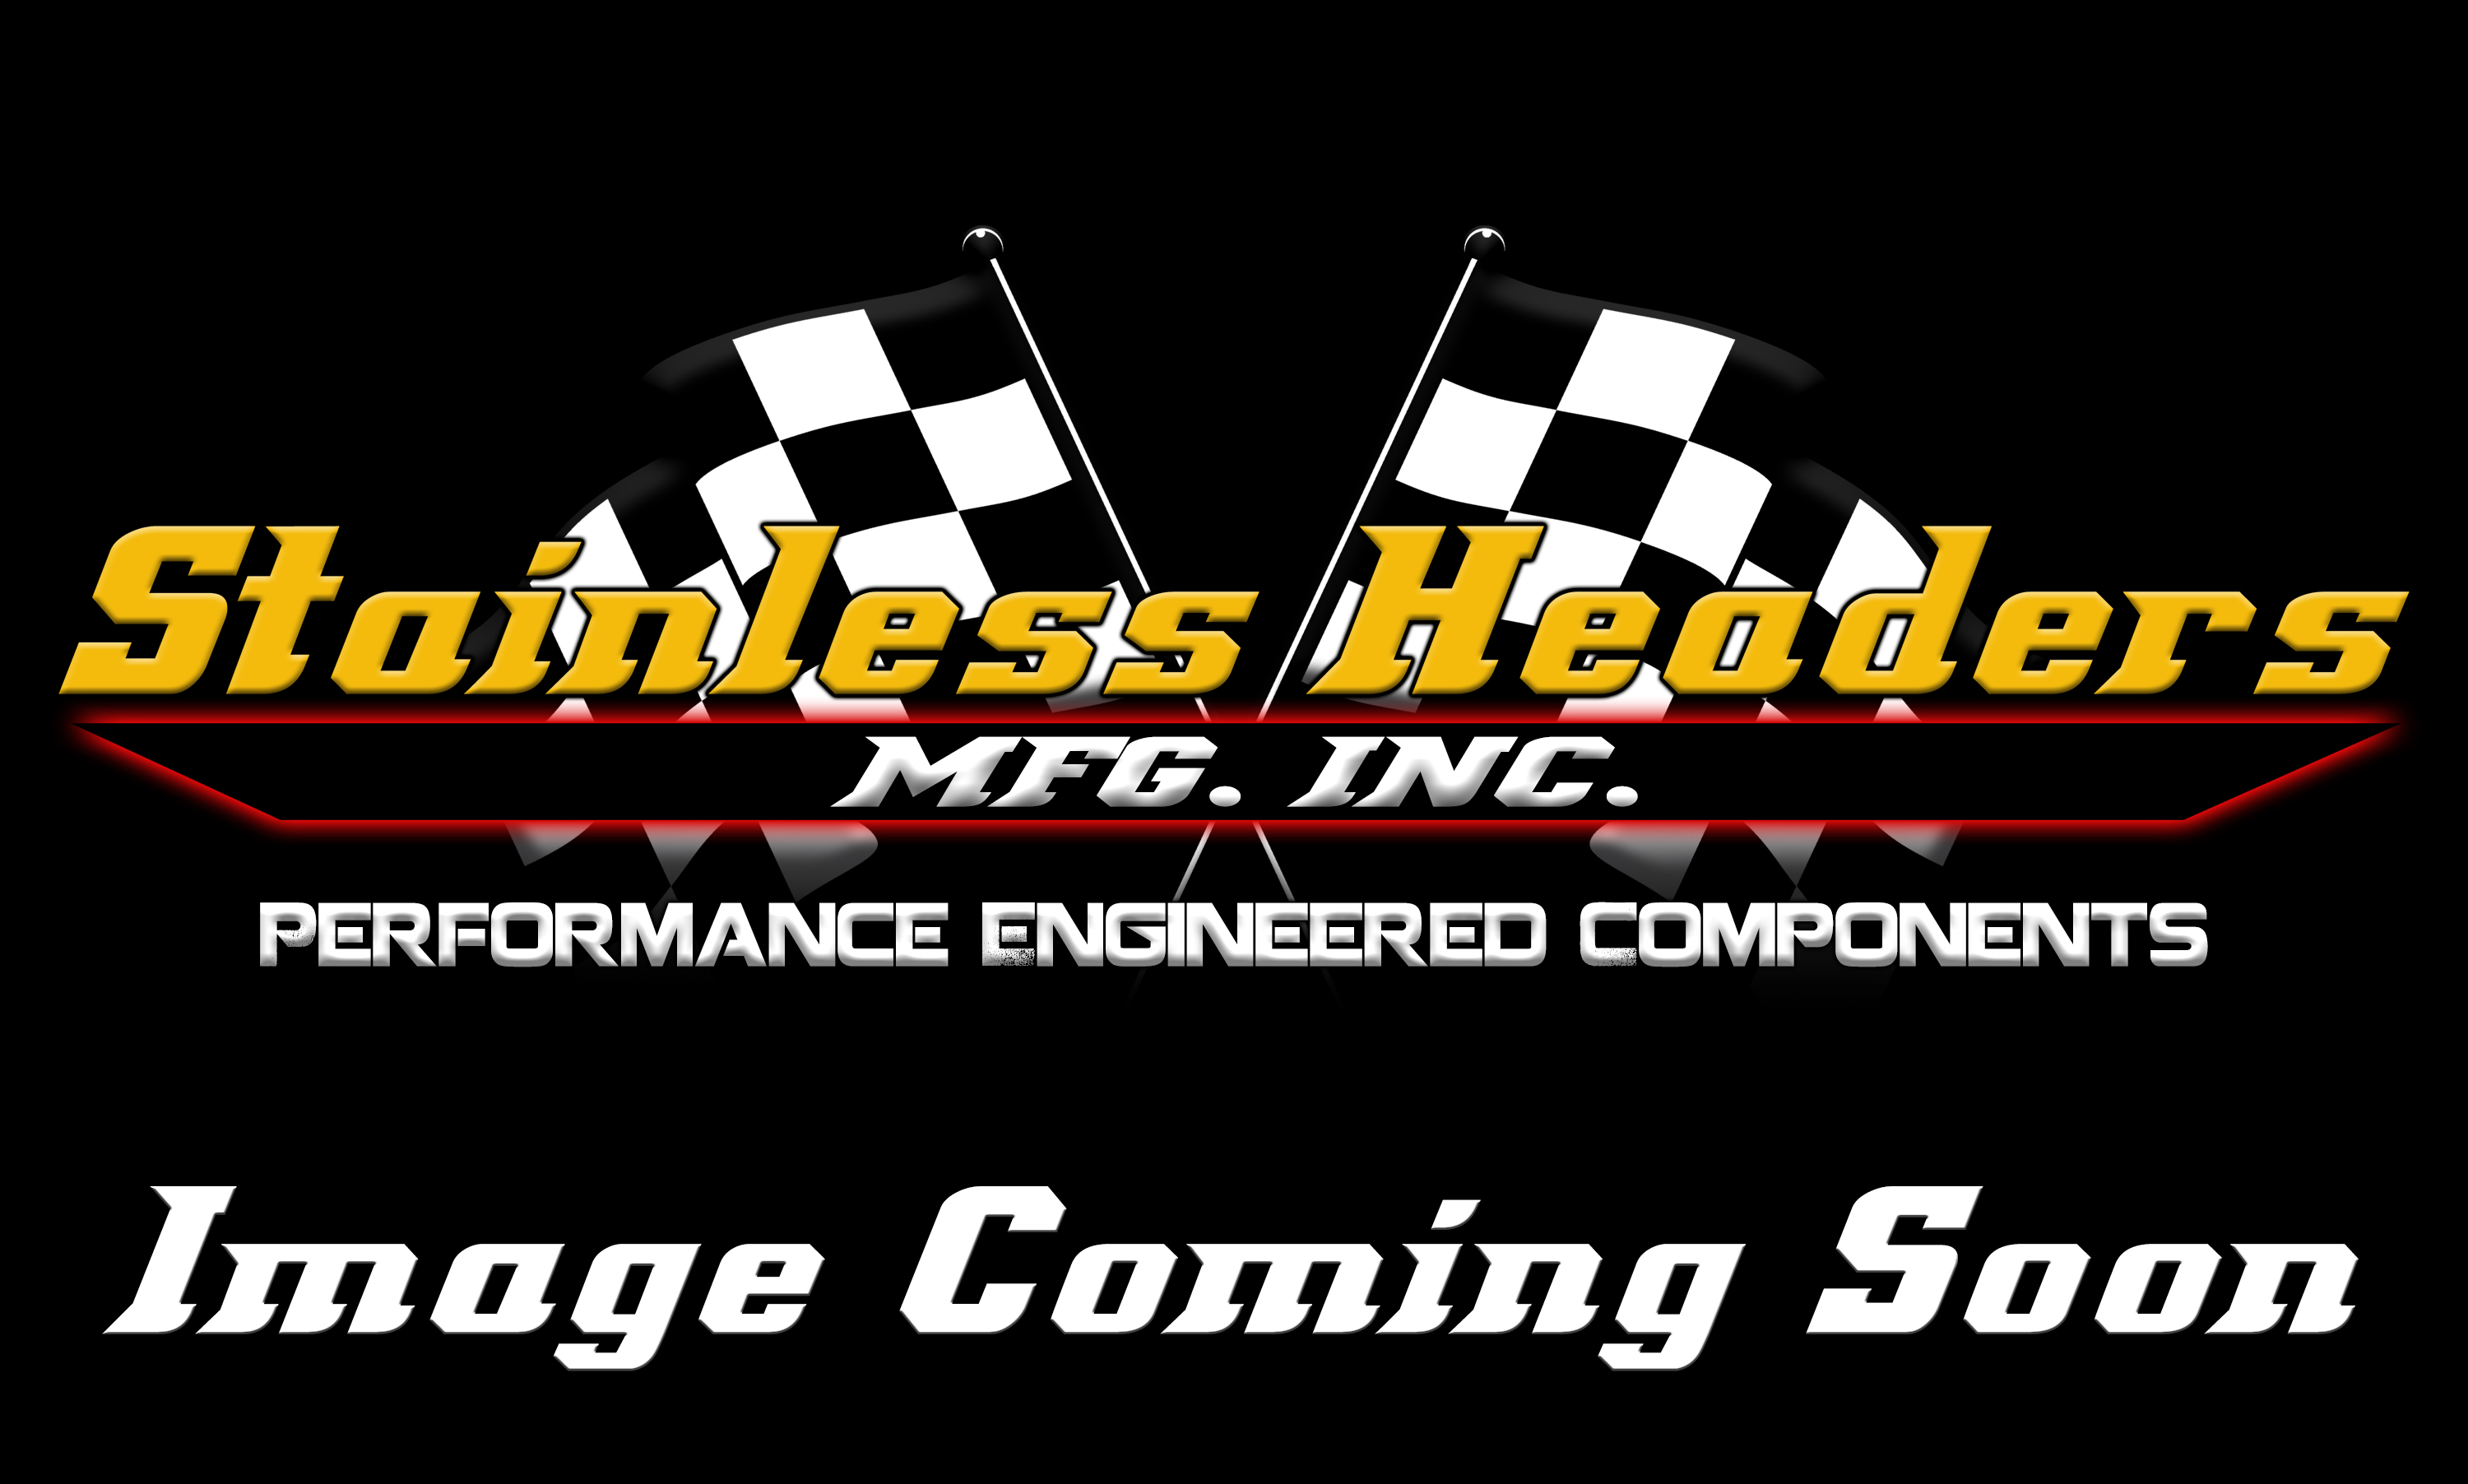 CompTurbo Technology Turbochargers - Comp Turbo Journal Bearing Turbochargers - CompTurbo Technologies - CTR4202R-7285 Mid Frame 360 Journal Bearing Turbocharger (1250 HP)